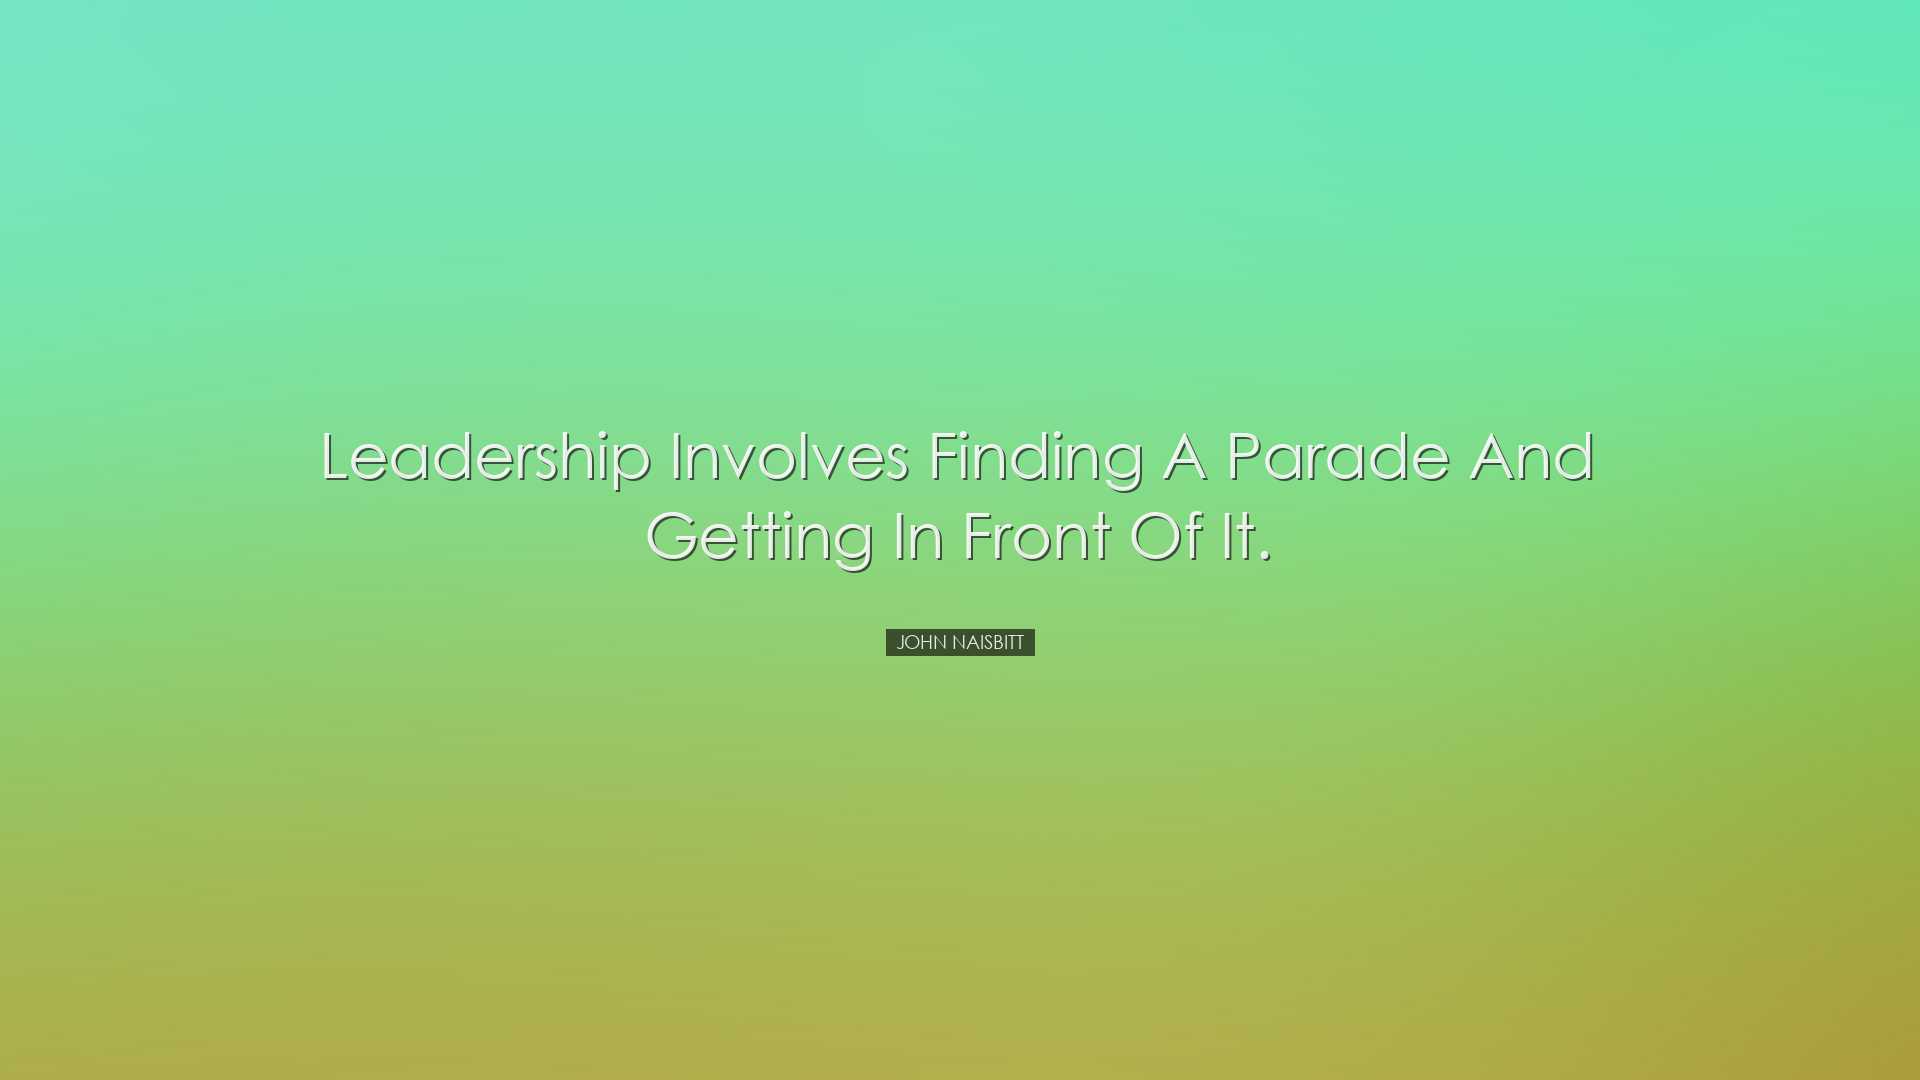 Leadership involves finding a parade and getting in front of it. -